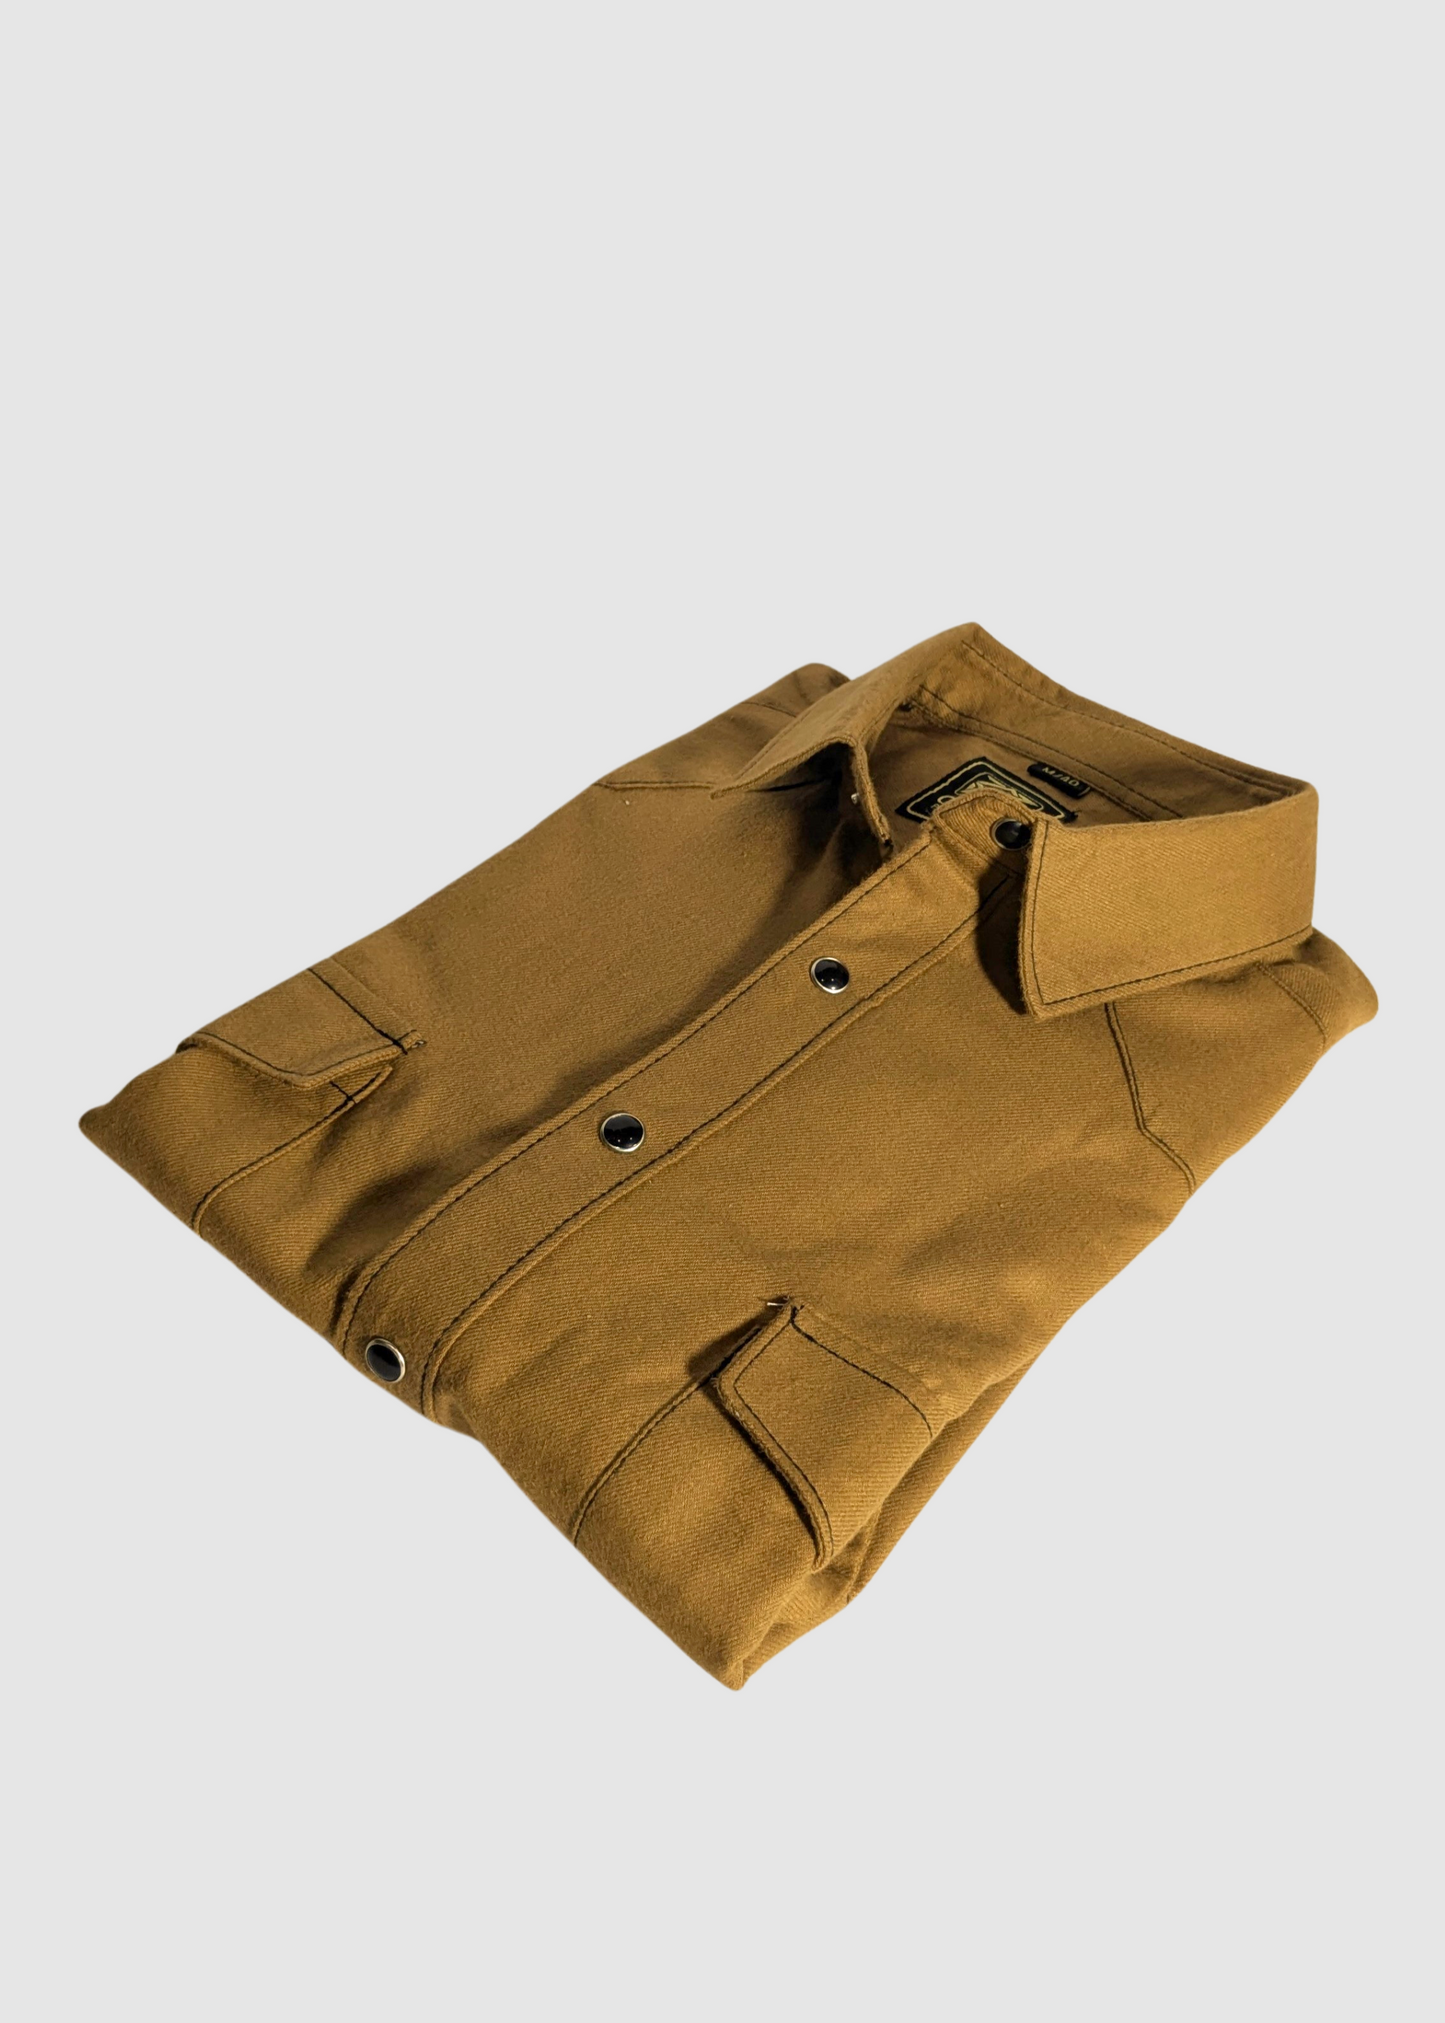 Men's Tan Colour Western Shirt in Twill Cotton with Western Yoke